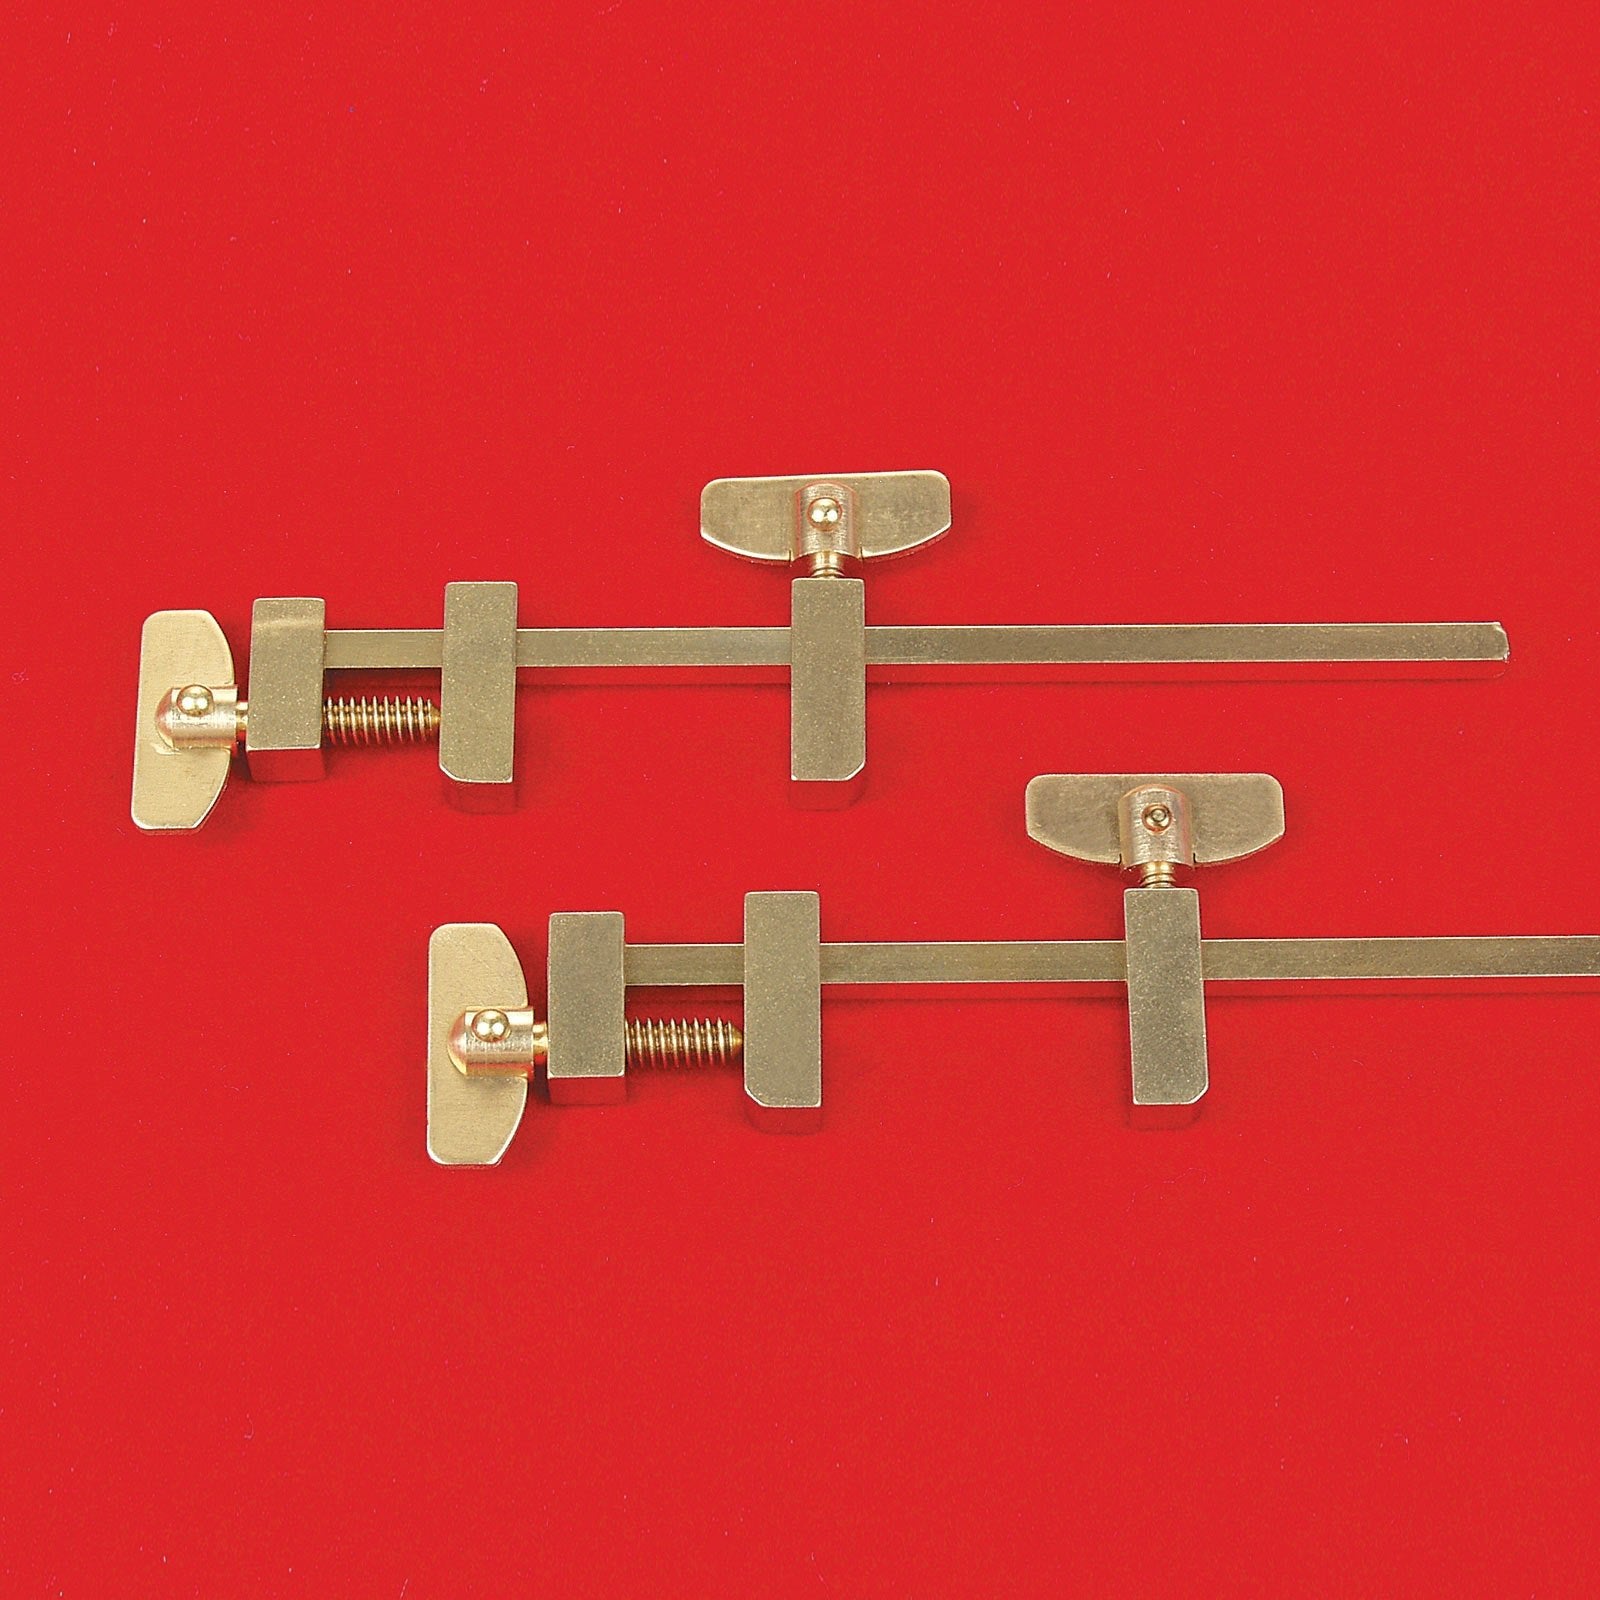 Solid Brass Miniature Bar Clamps, 4 - 3/4 Inches Long (Set of 2)